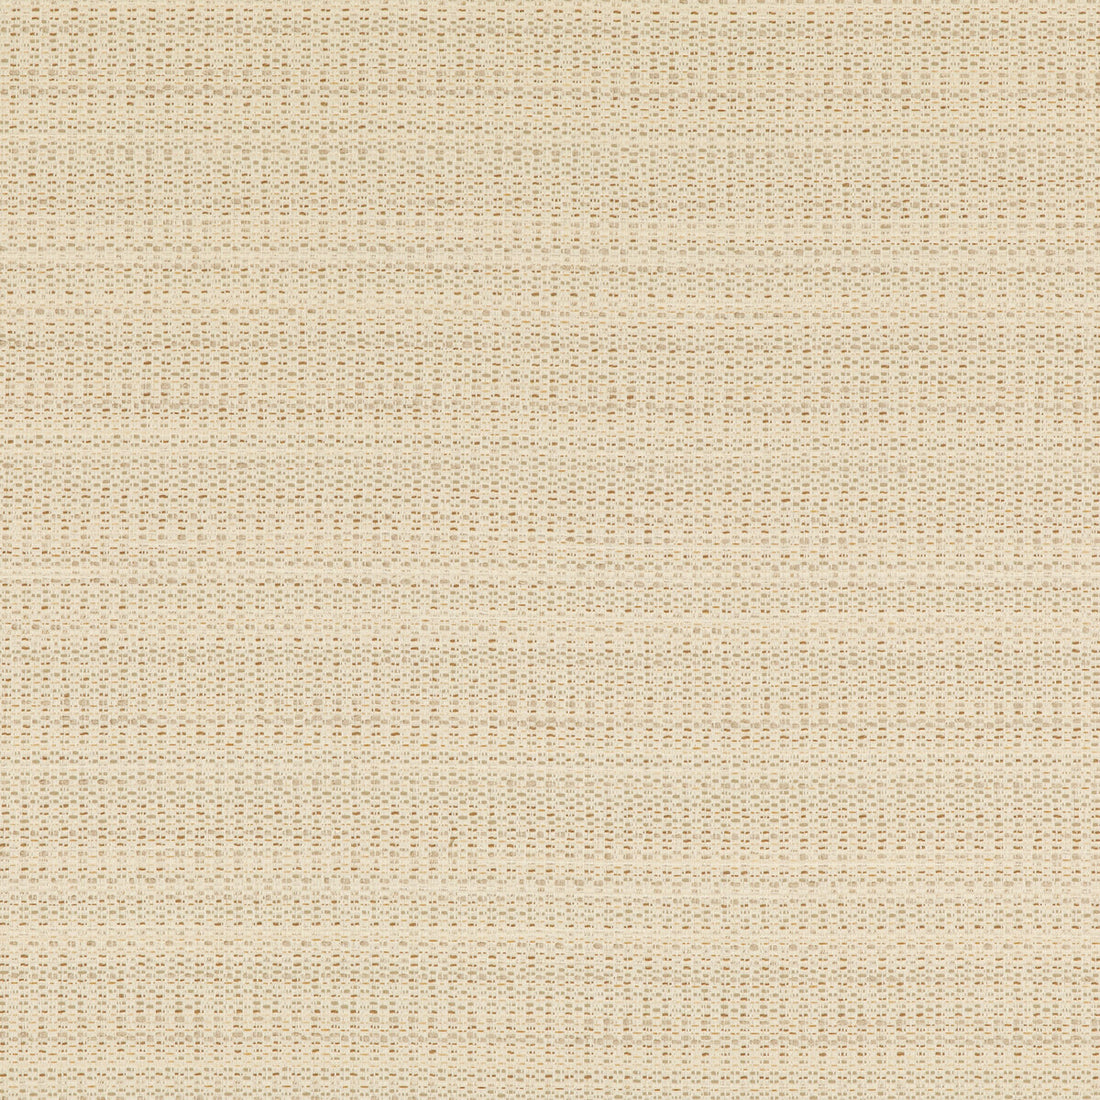 Bambara fabric in ivory color - pattern ED85320.104.0 - by Threads in the Luxury Weaves II collection